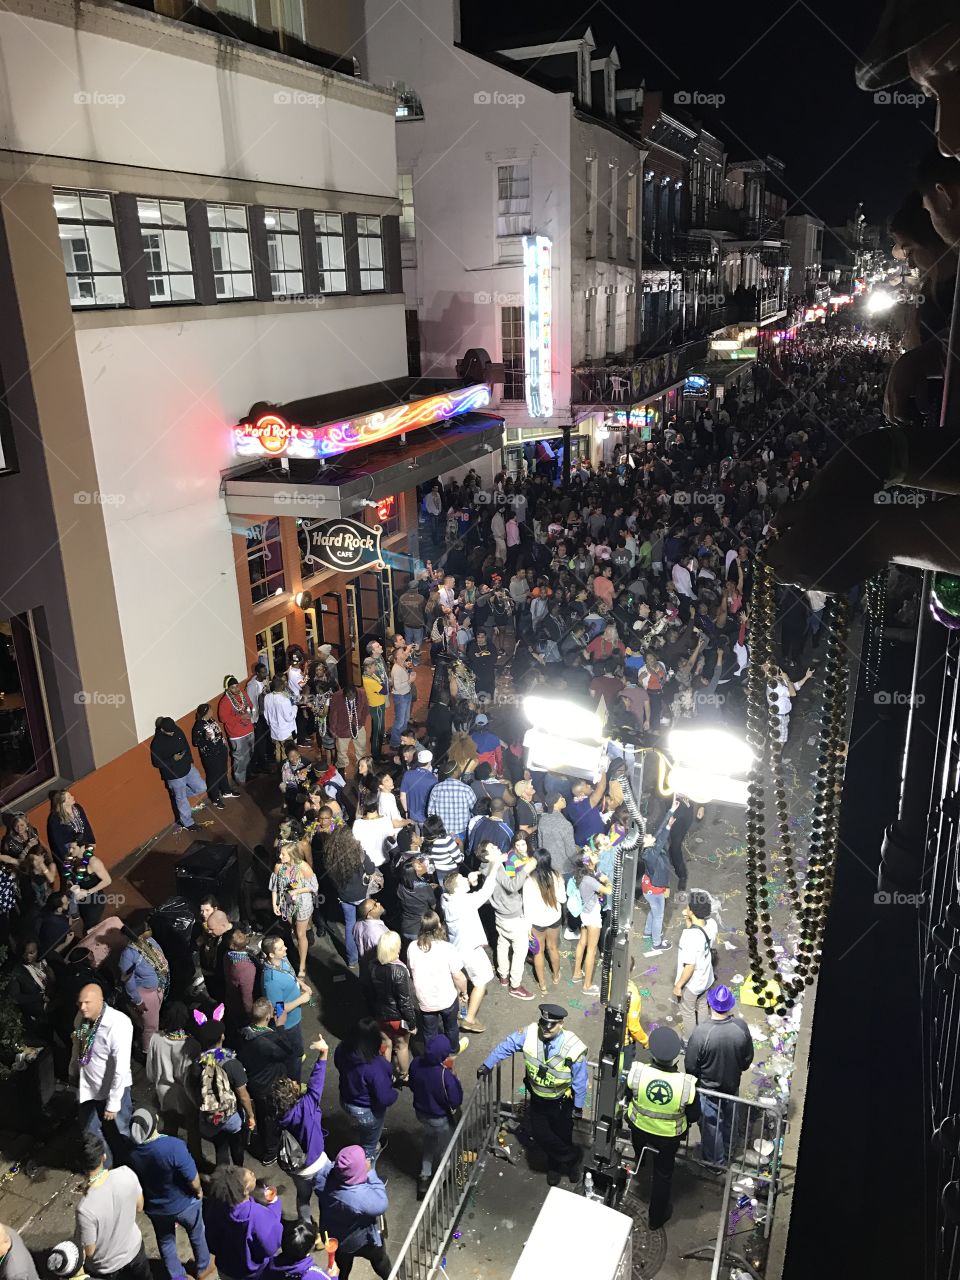 The Bourbon Street crowds during Mardi Gras. View from Bourbon and Iberville.